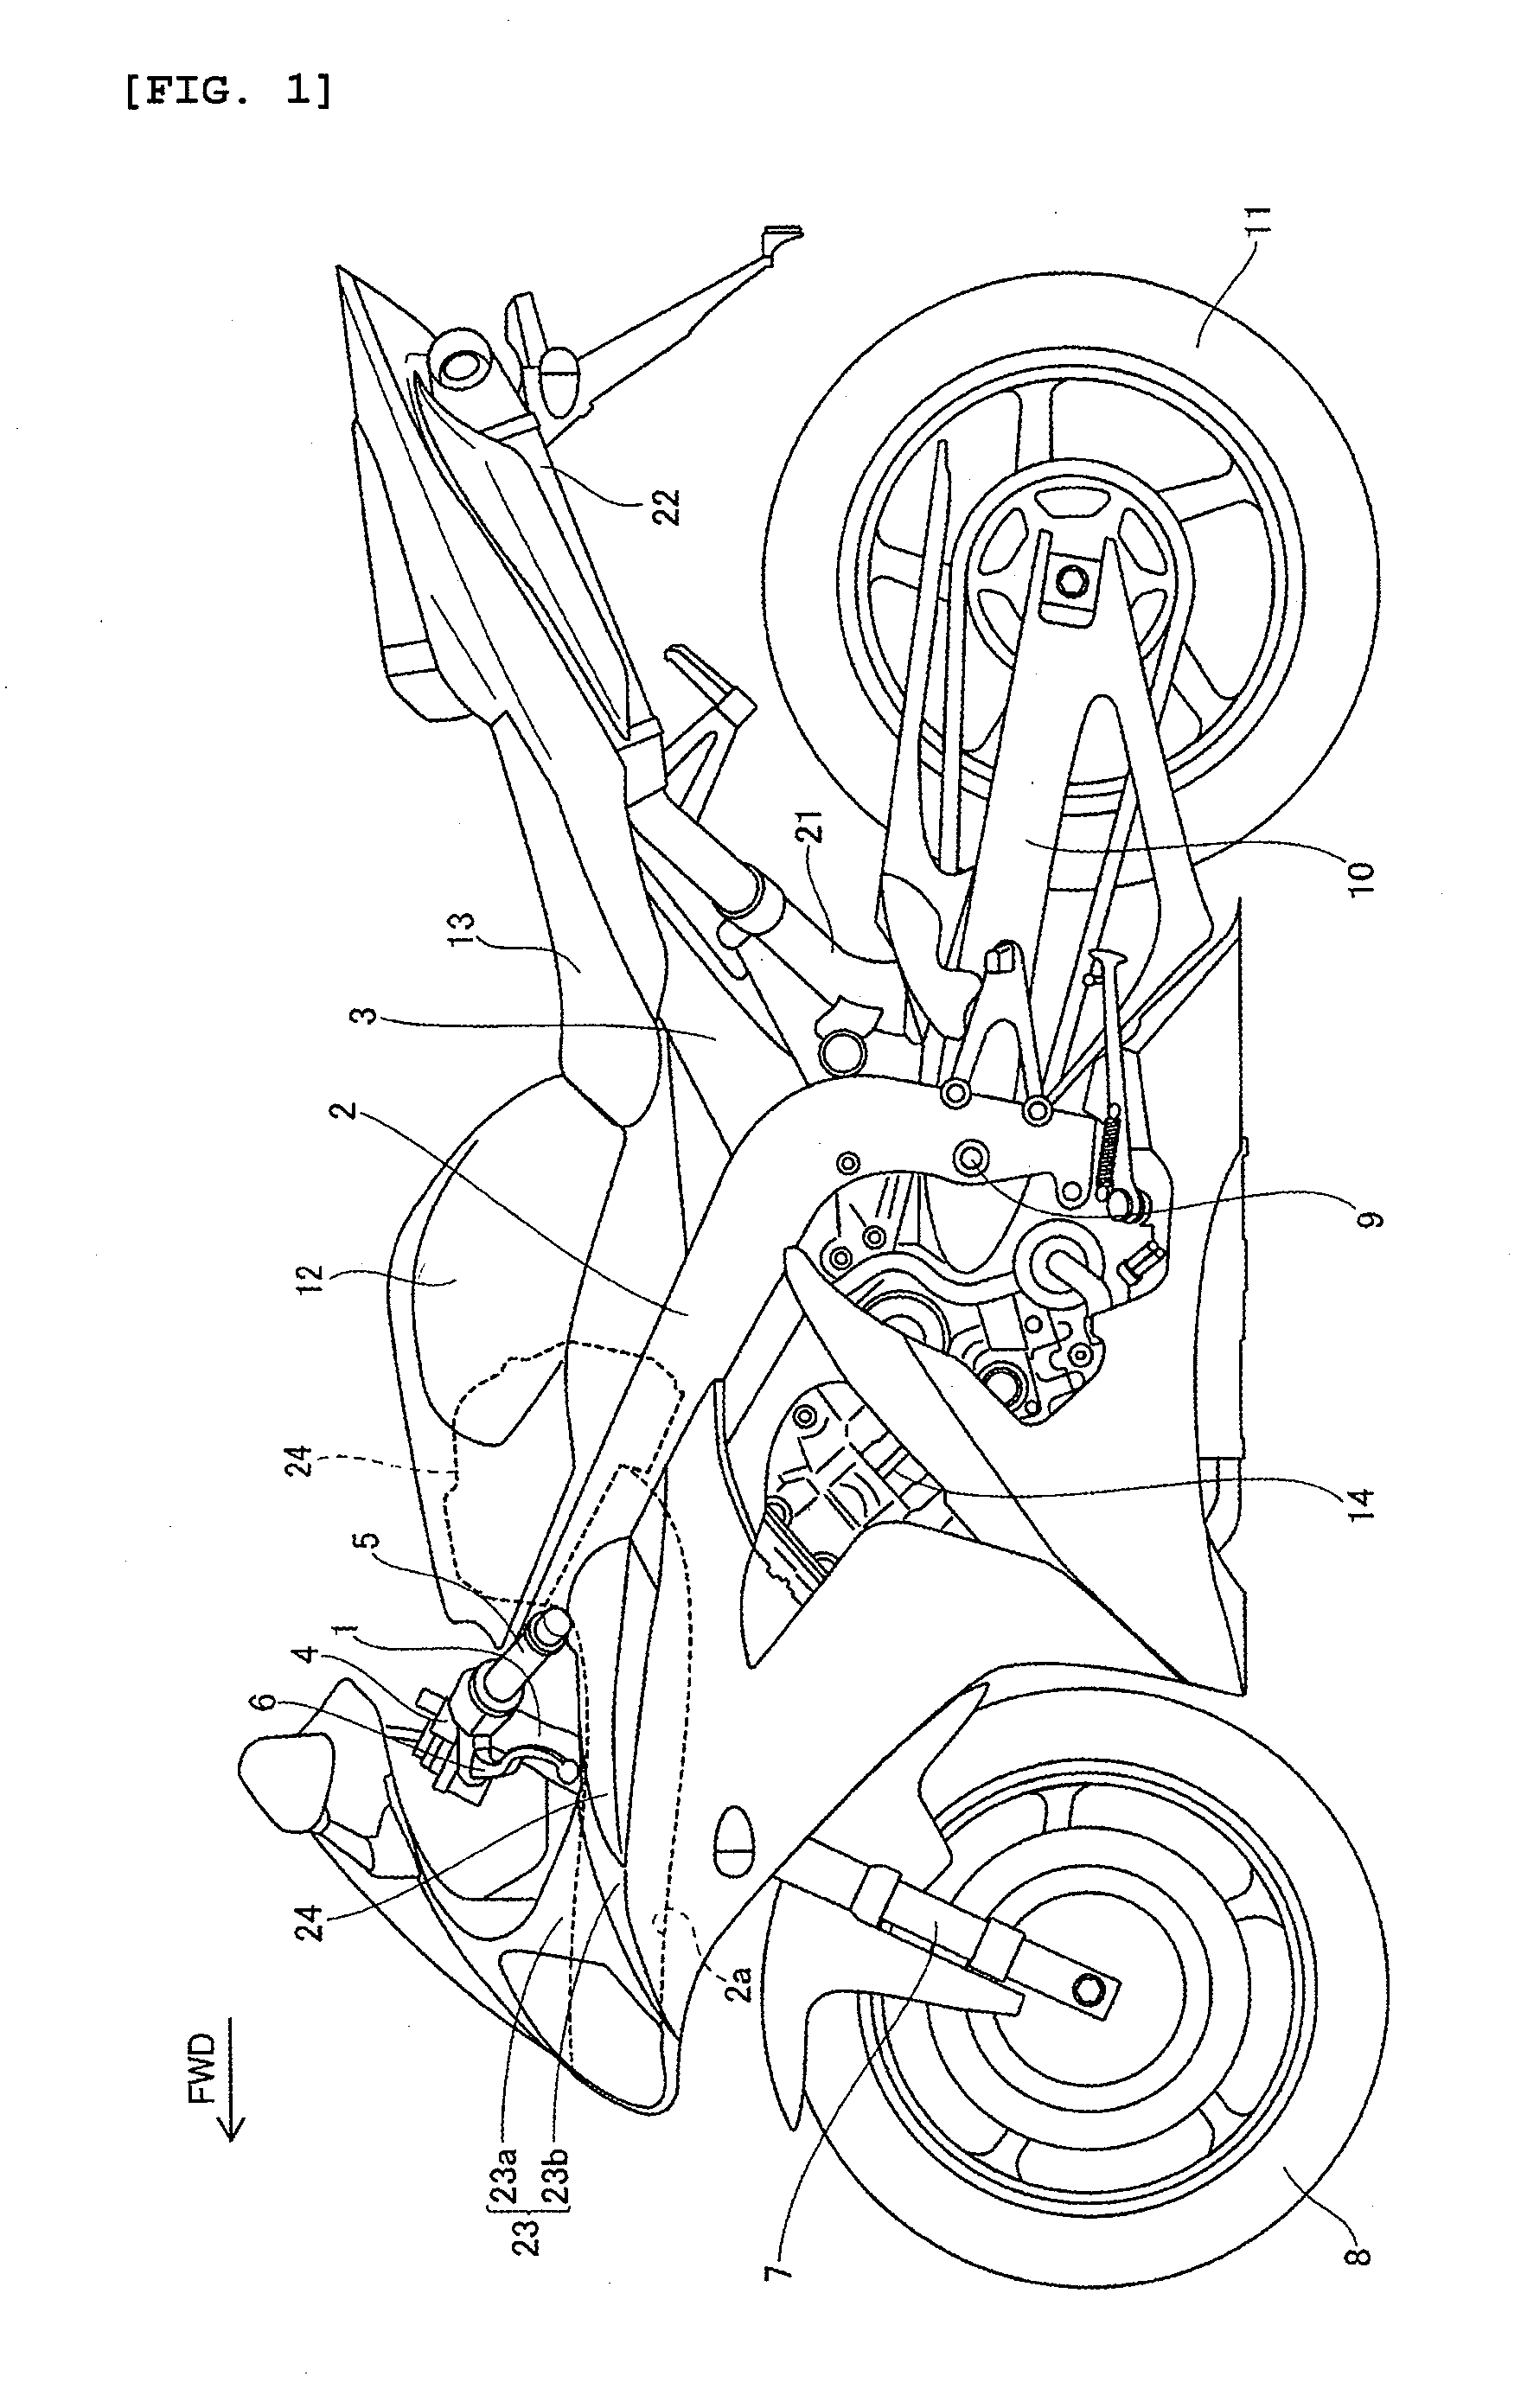 Vehicle with variable air intake arrangement